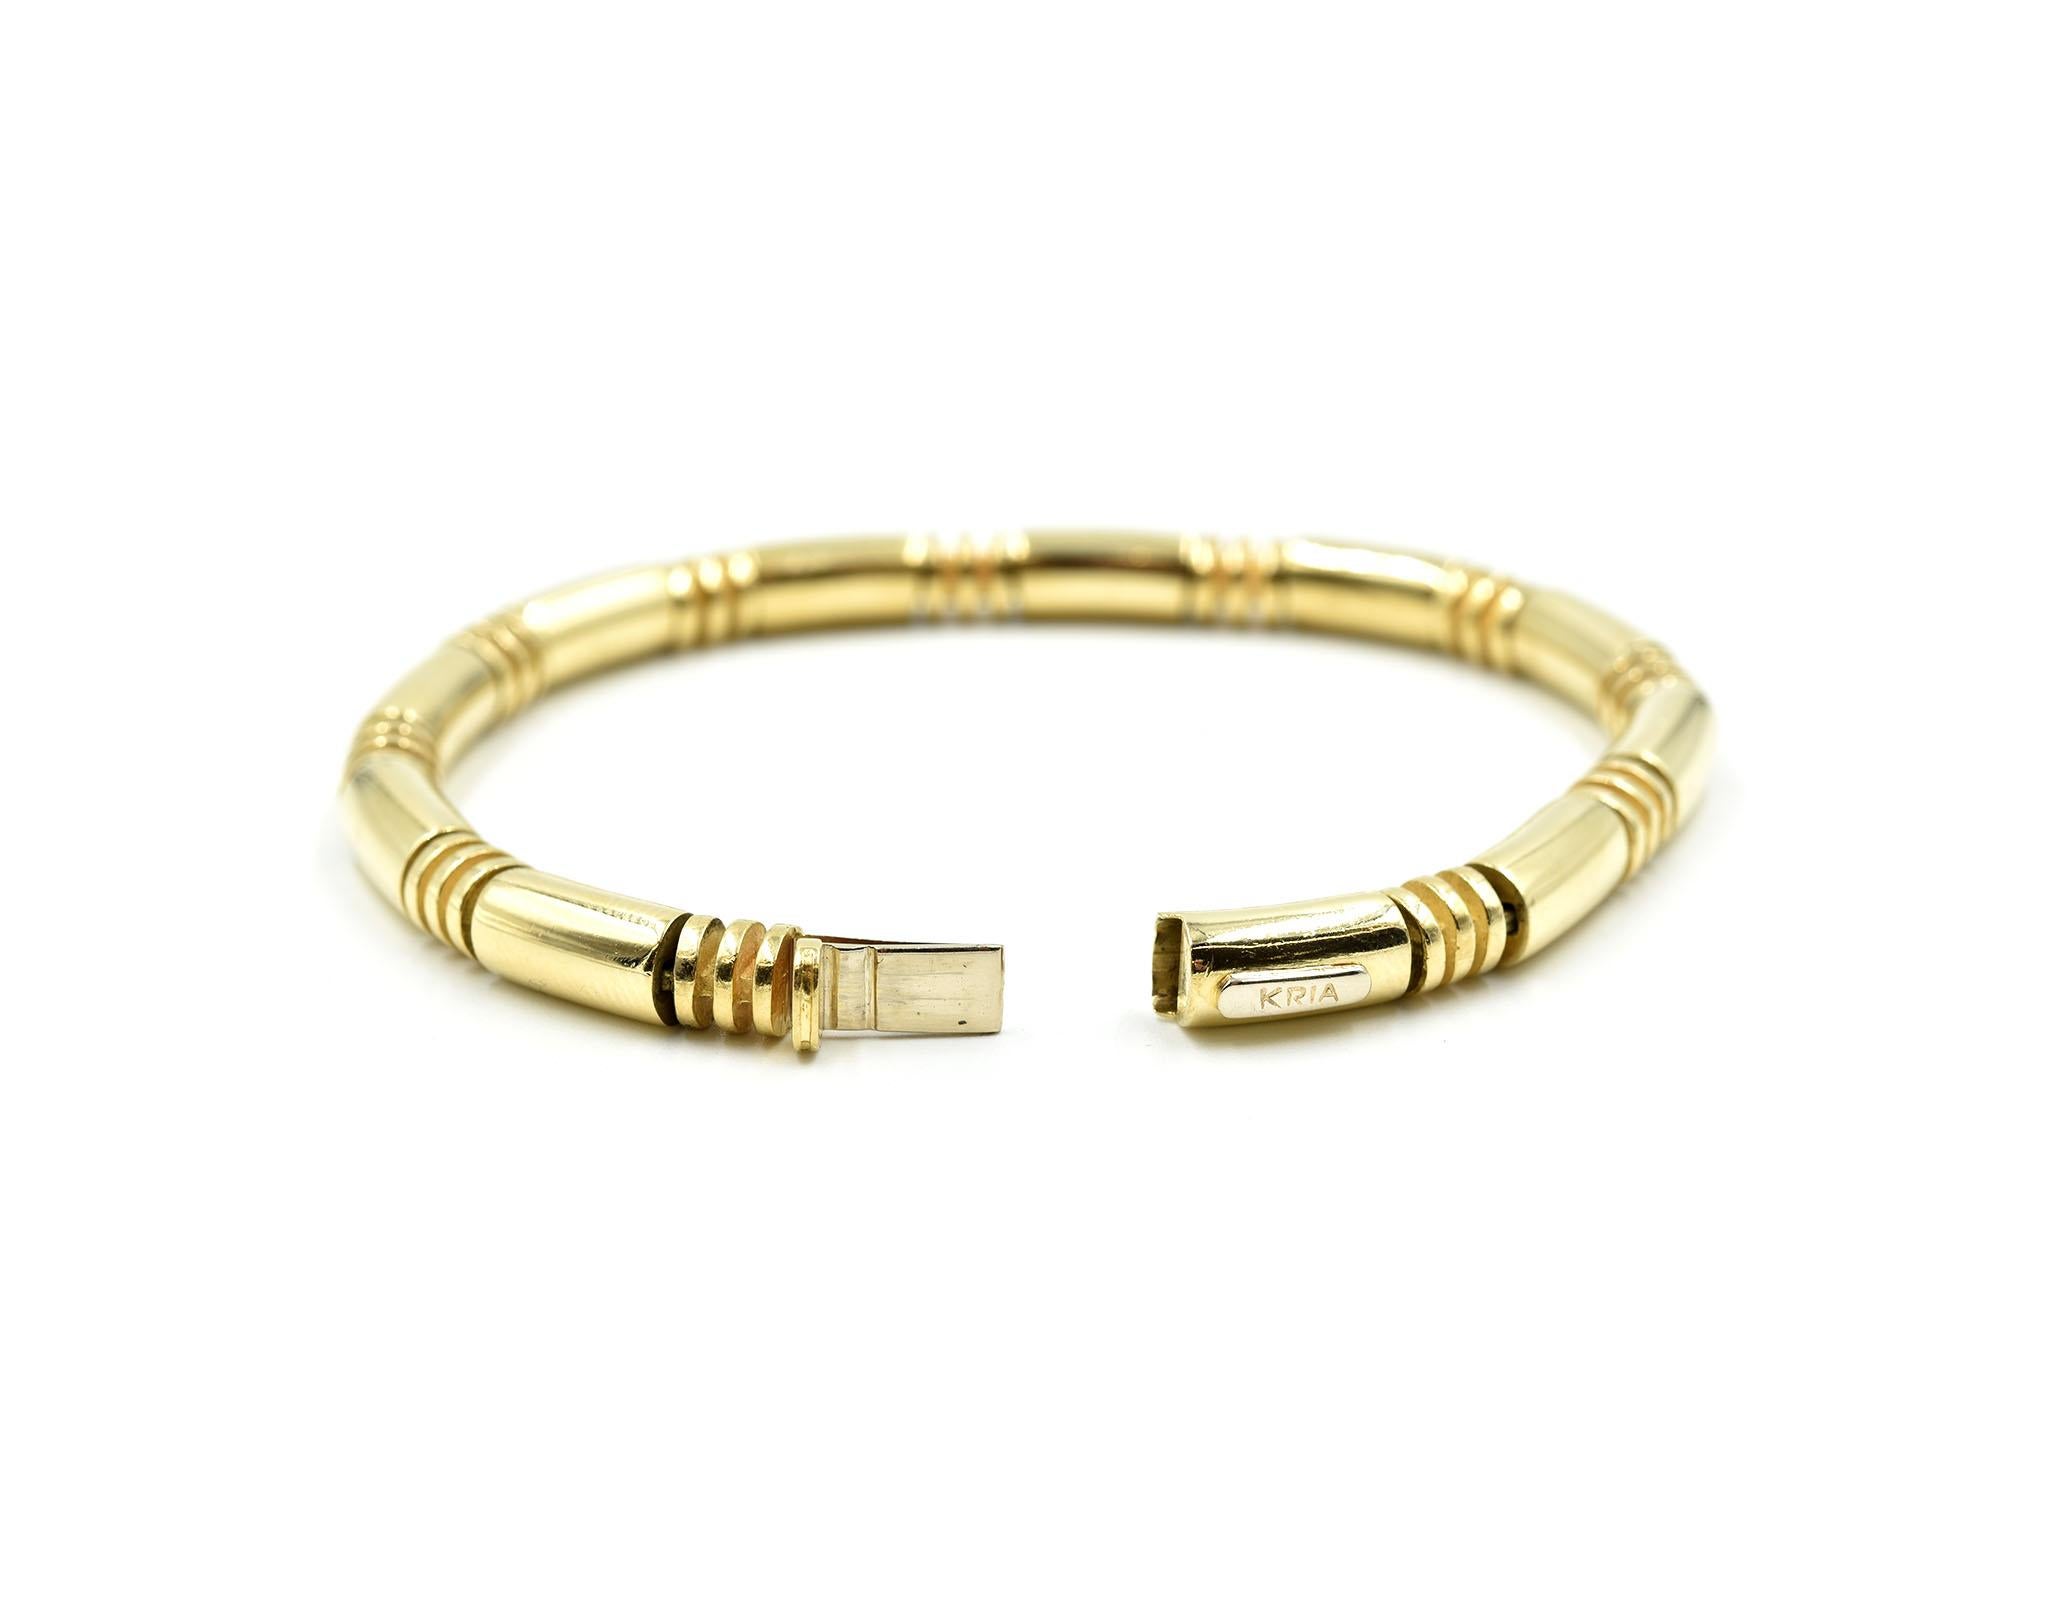 Designer: Kria
Material: 18k yellow gold
Dimensions: bracelet will fit 7 1/2-inch wrist
Weight: 35.60 grams
